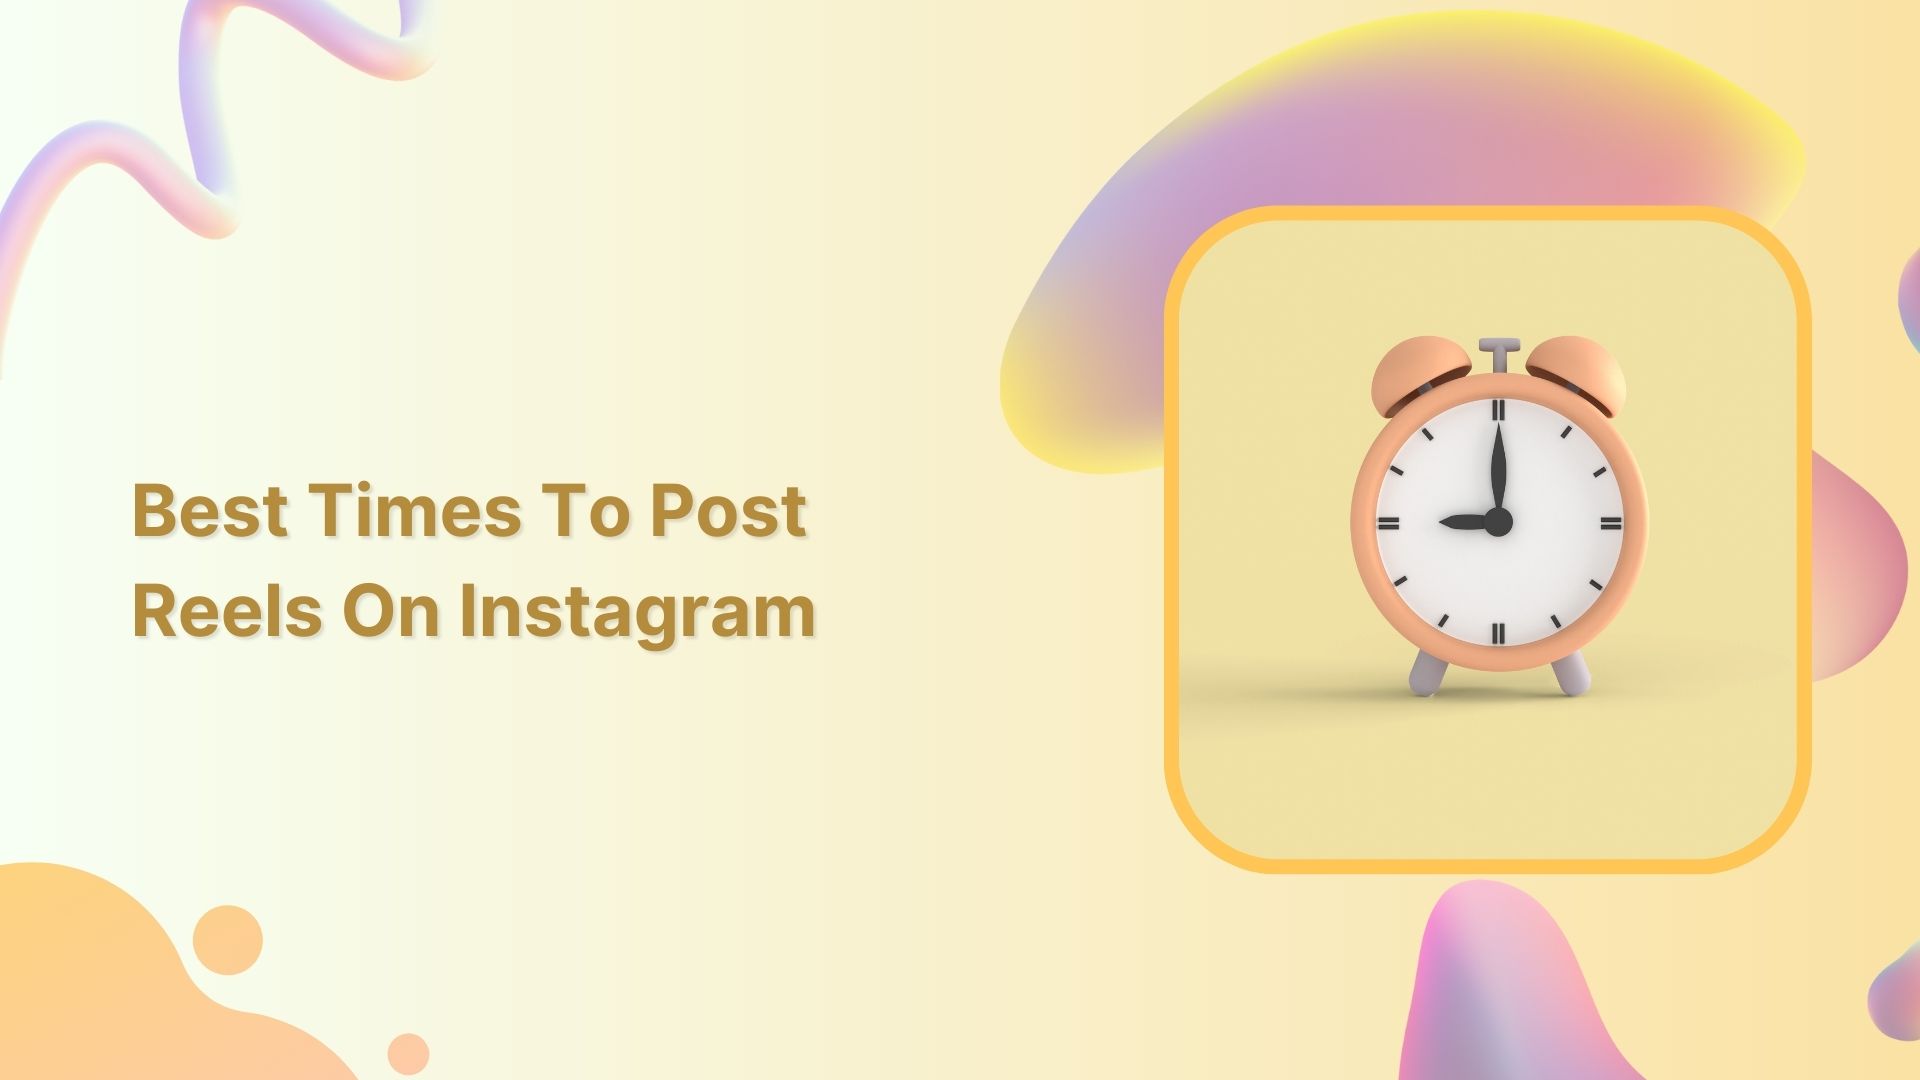 Guide On The Best Times to Post Reels on Instagram in 2023